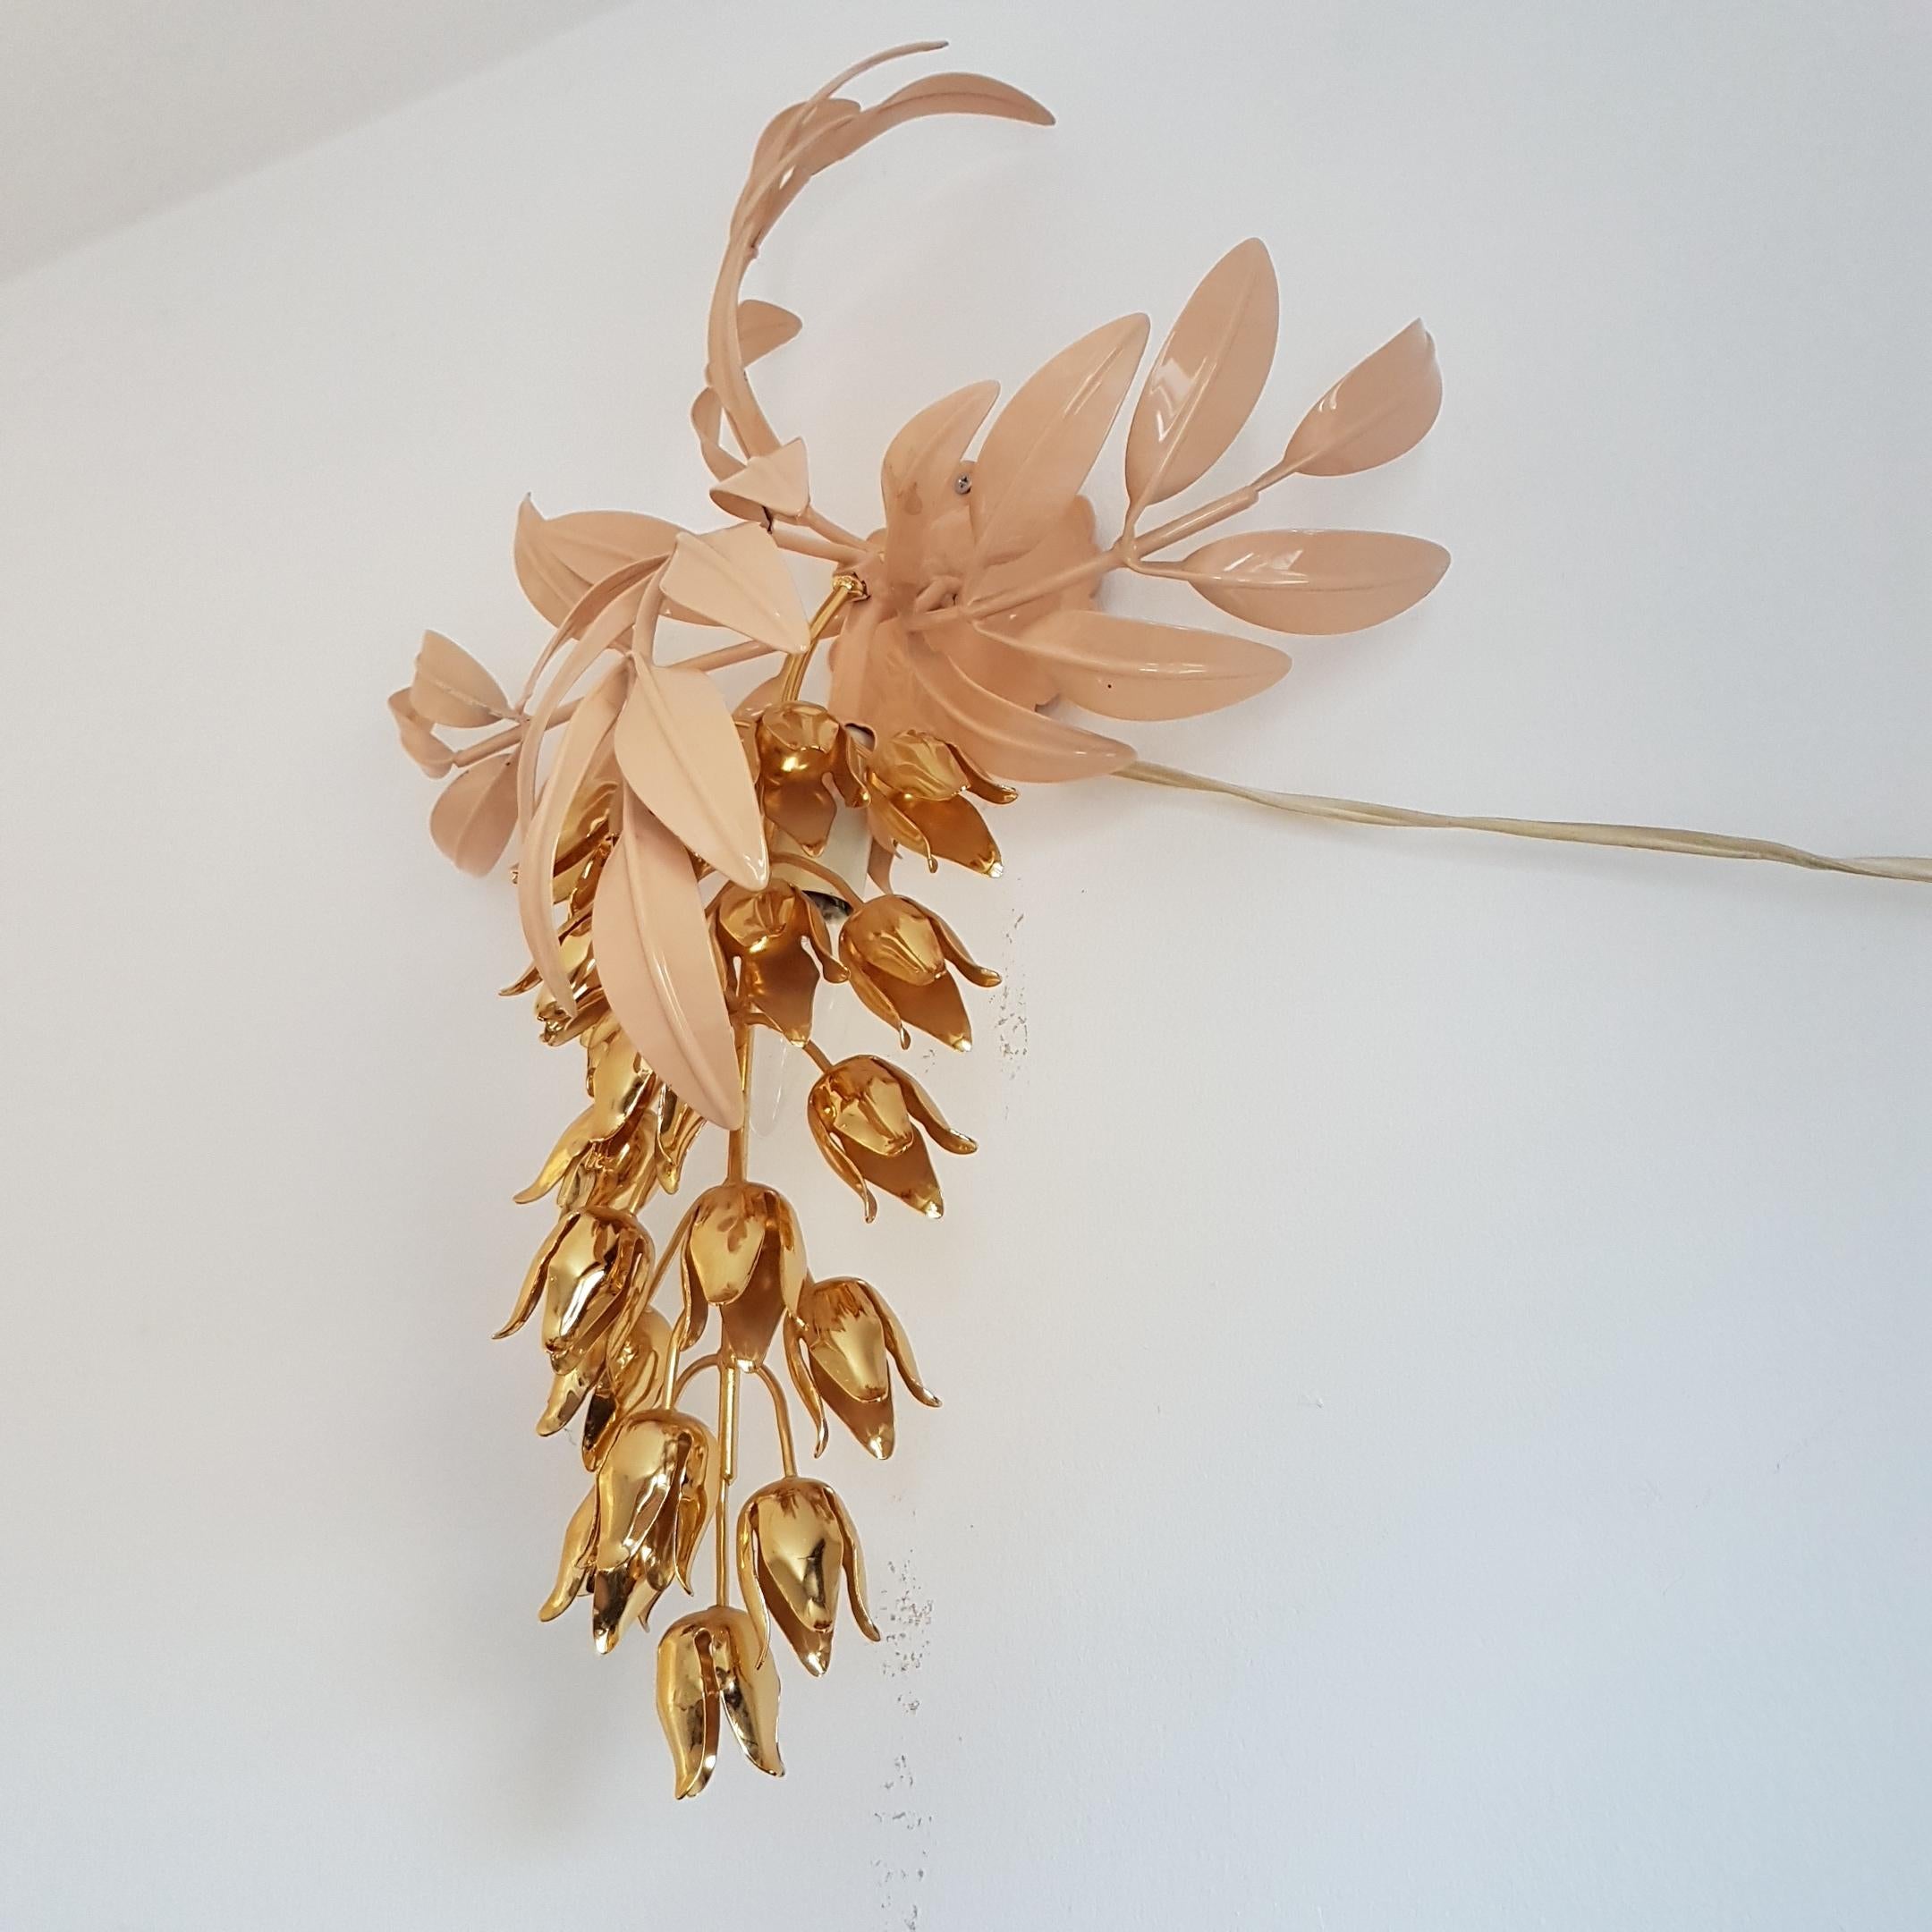 German Gilt Wall Lamp with Wisteria Flowers by Hans Kögl for Unknown, 1970s For Sale